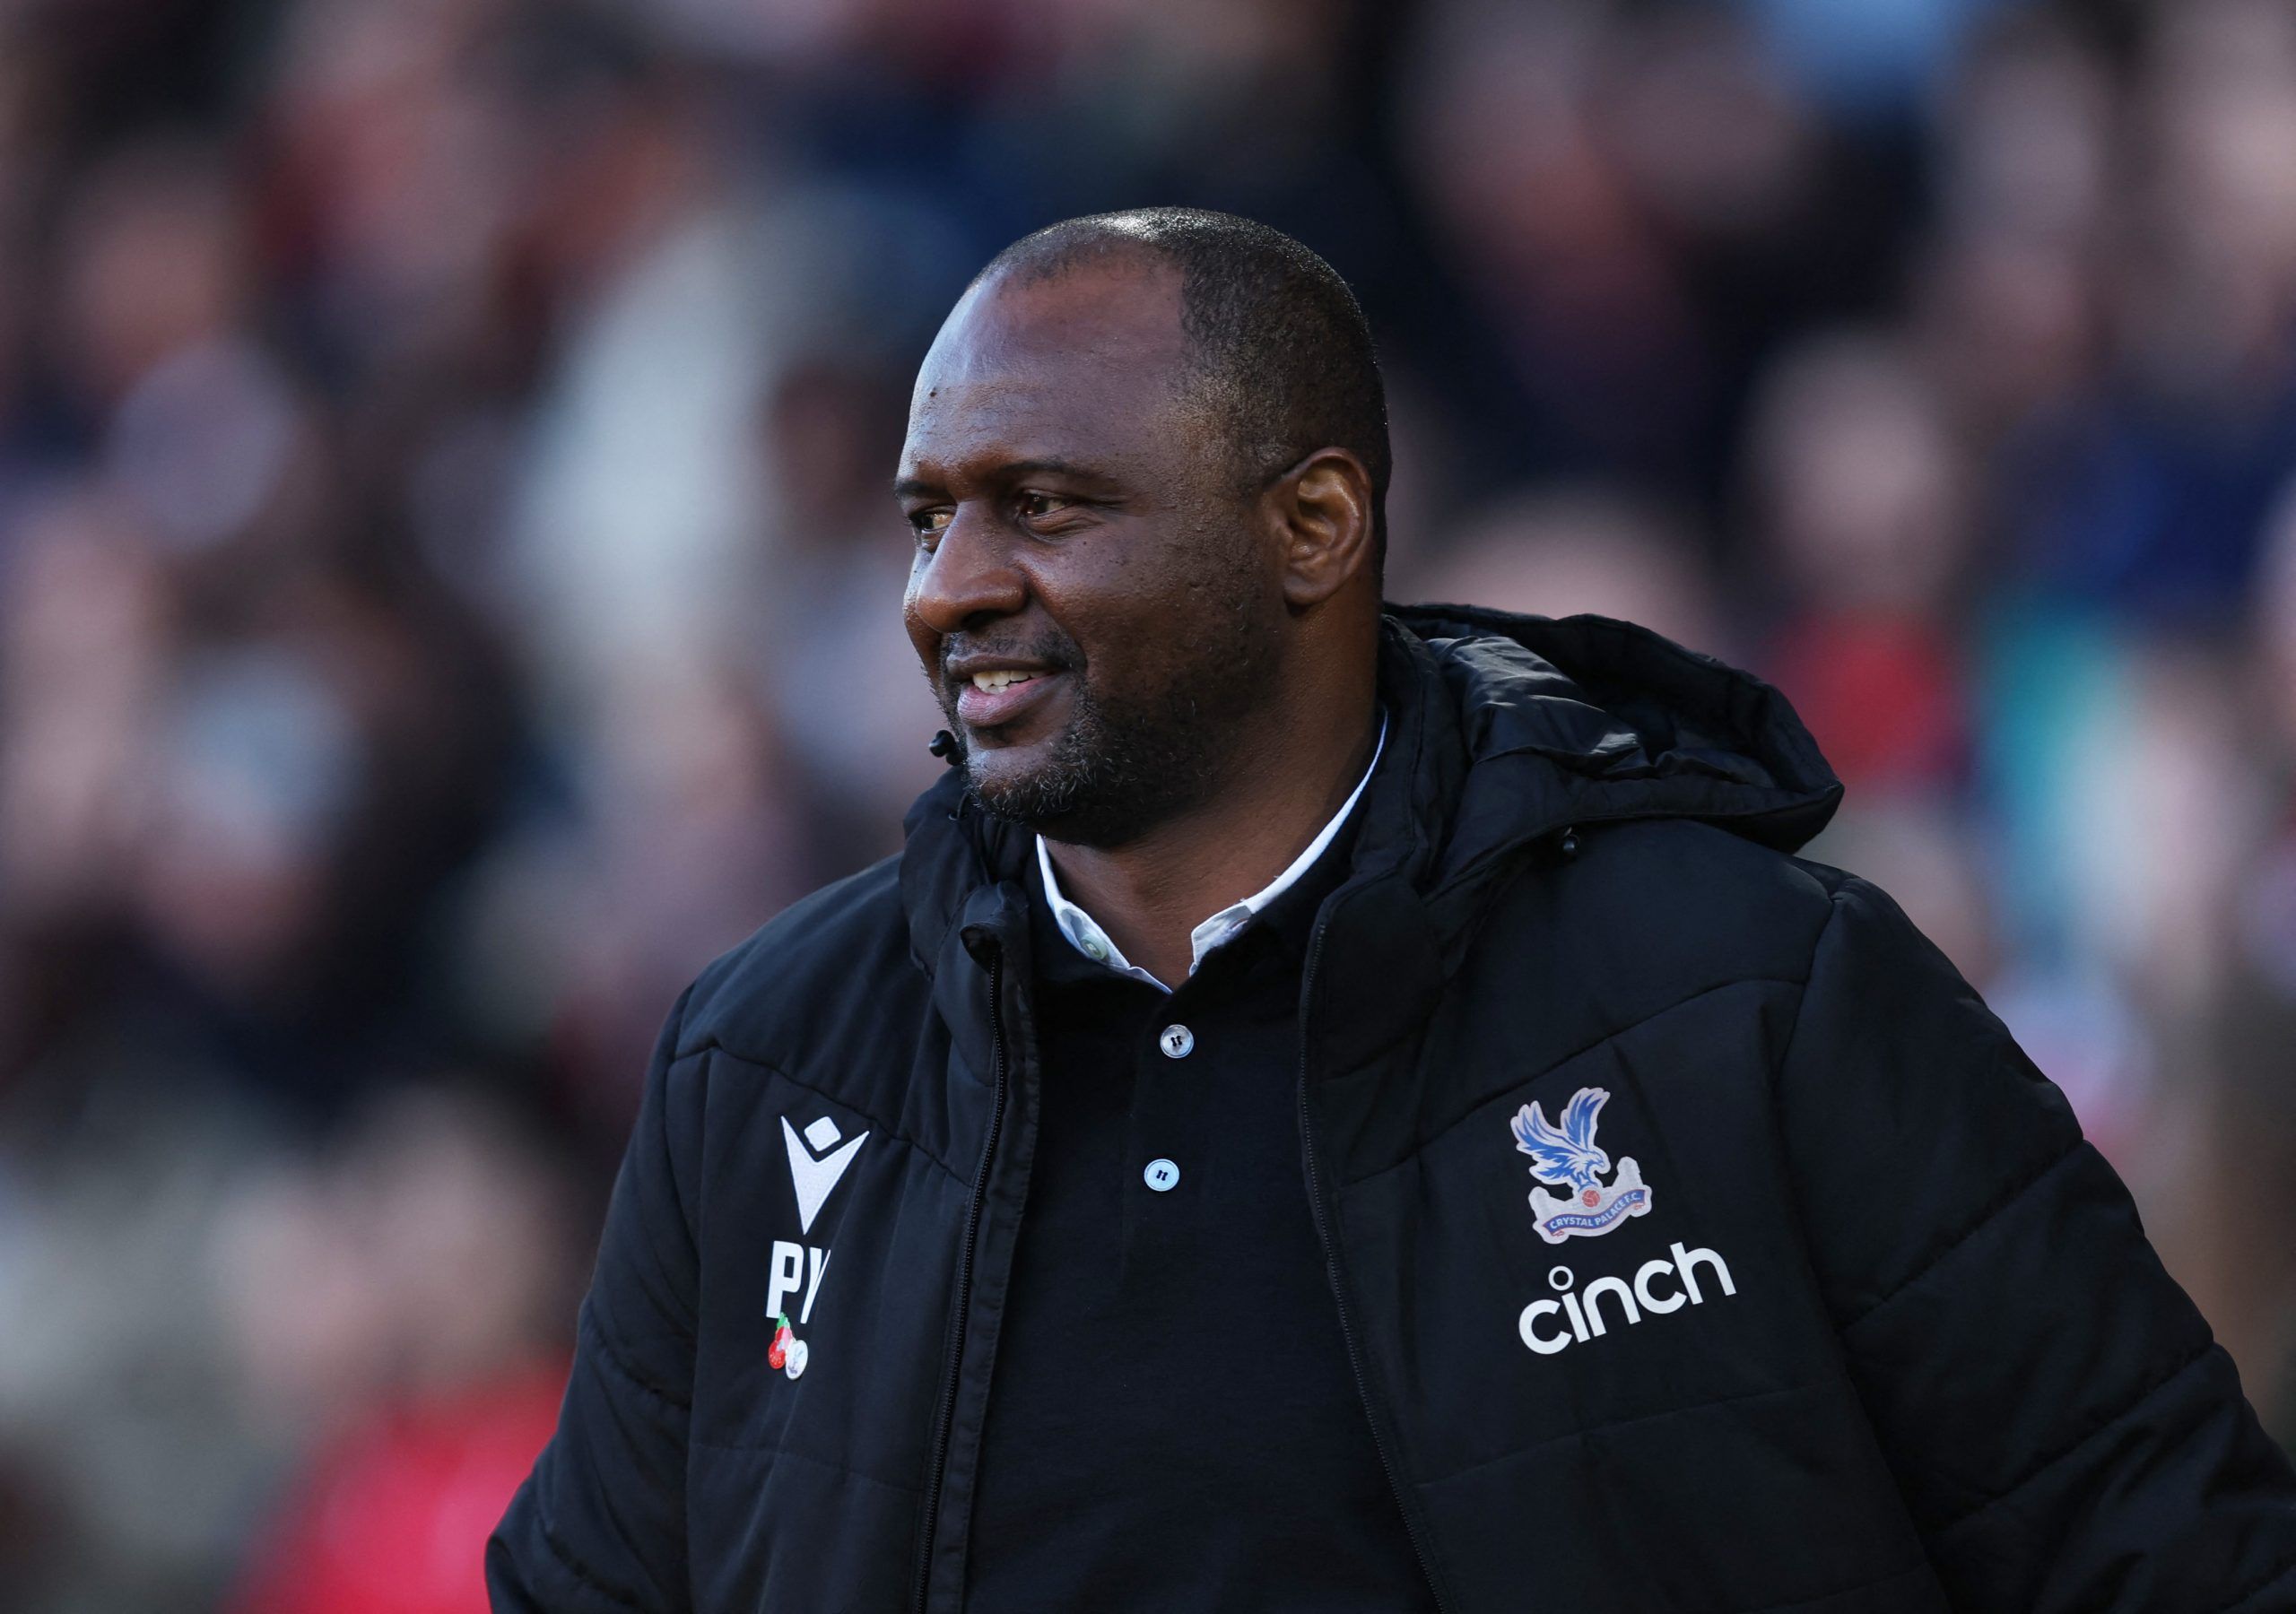 Soccer Football - Premier League - Nottingham Forest v Crystal Palace - The City Ground, Nottingham, Britain - November 12, 2022  Crystal Palace manager Patrick Vieira before the match Action Images via Reuters/John Clifton EDITORIAL USE ONLY. No use with unauthorized audio, video, data, fixture lists, club/league logos or 'live' services. Online in-match use limited to 75 images, no video emulation. No use in betting, games or single club /league/player publications.  Please contact your accoun